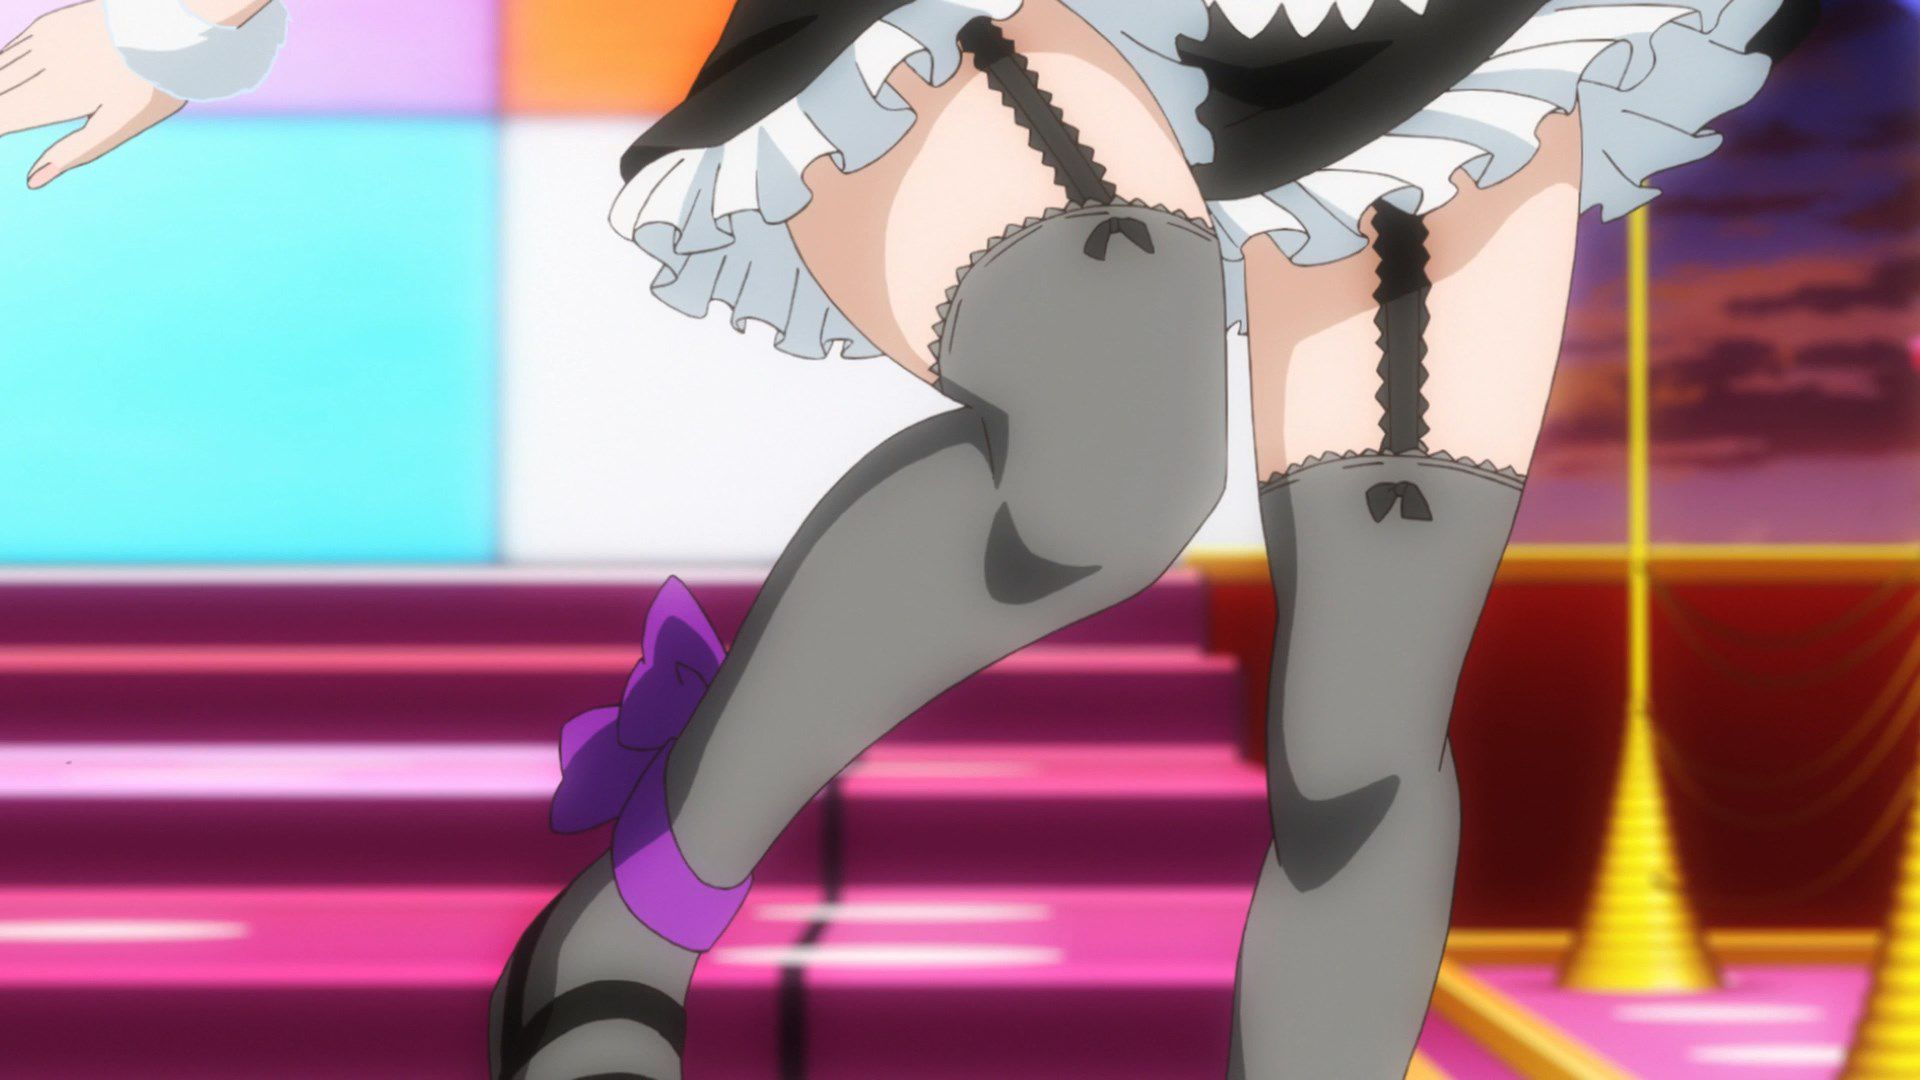 [God images] "love live! ' Μm ' PV's leg is too erotic everyone wakes up to a leg fetish of wwwww 17